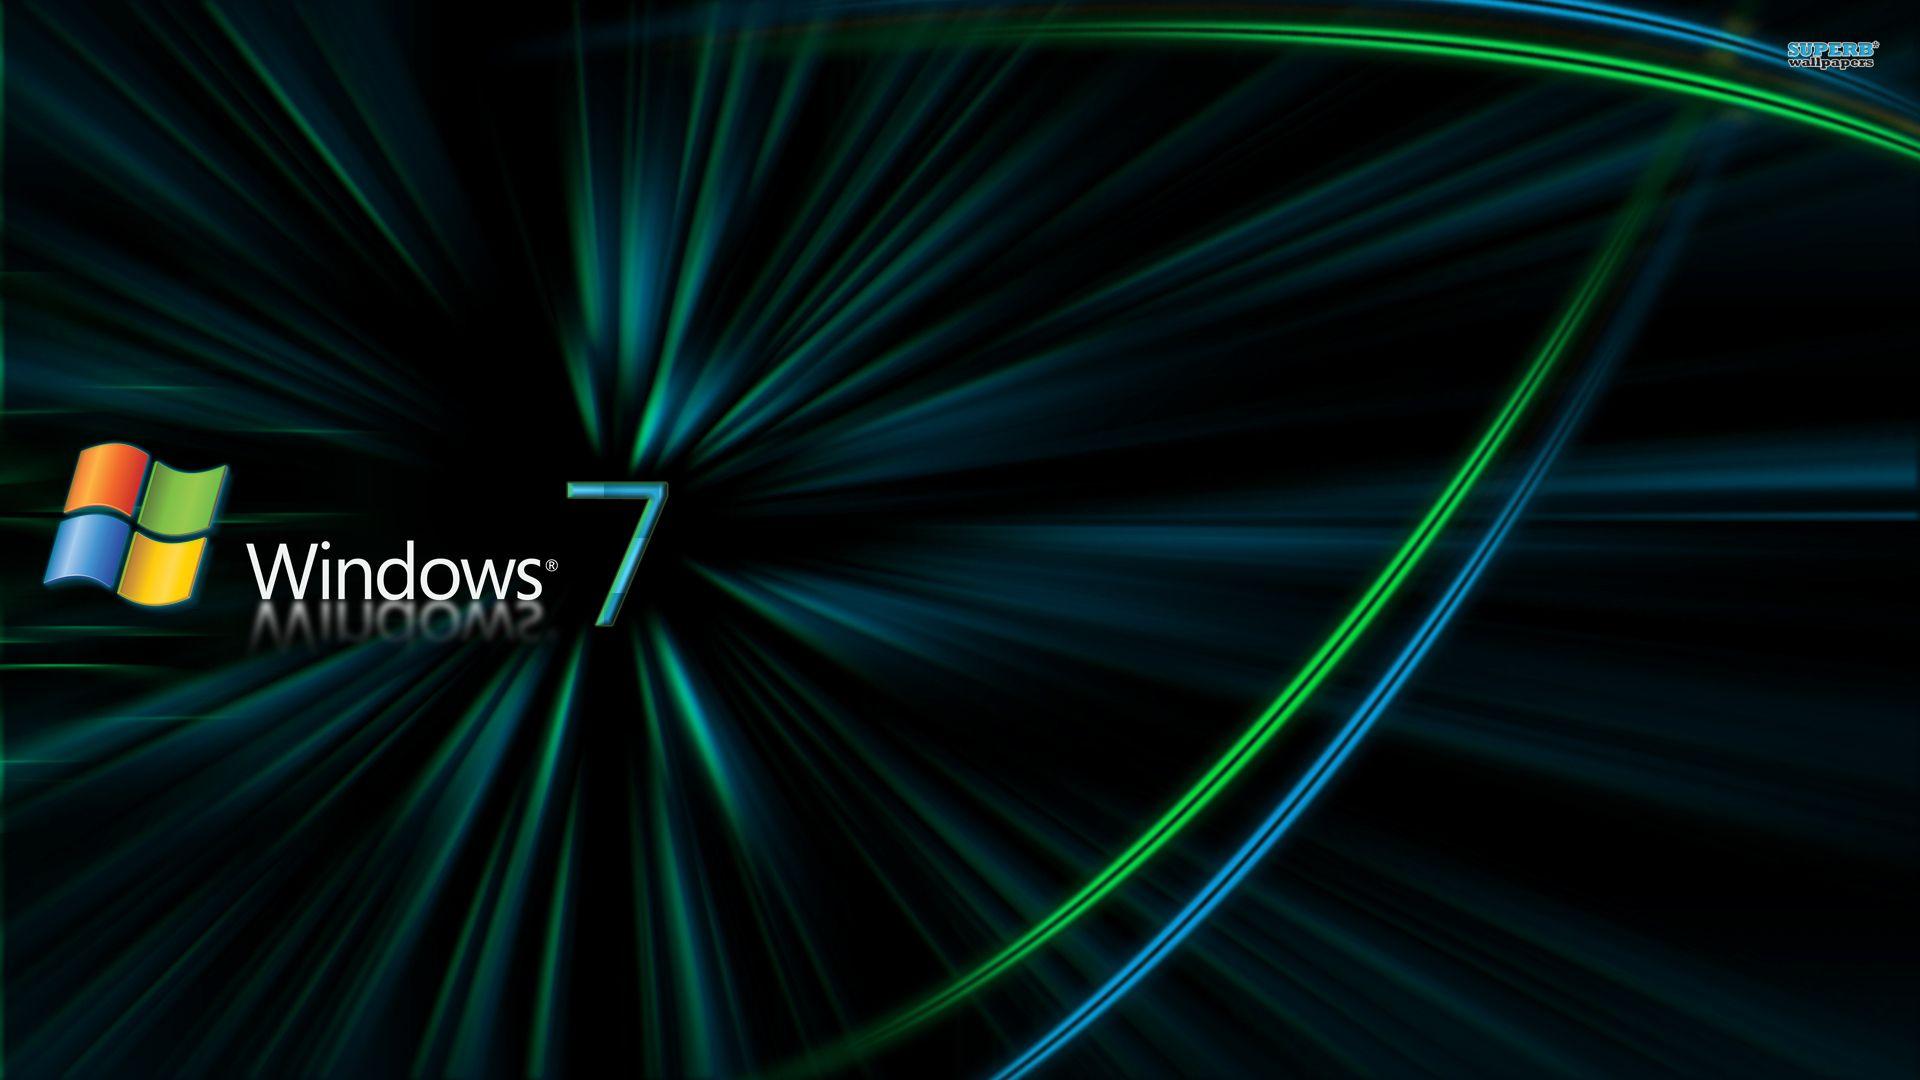 Windows 7 Operation System HD Background Wallpaper